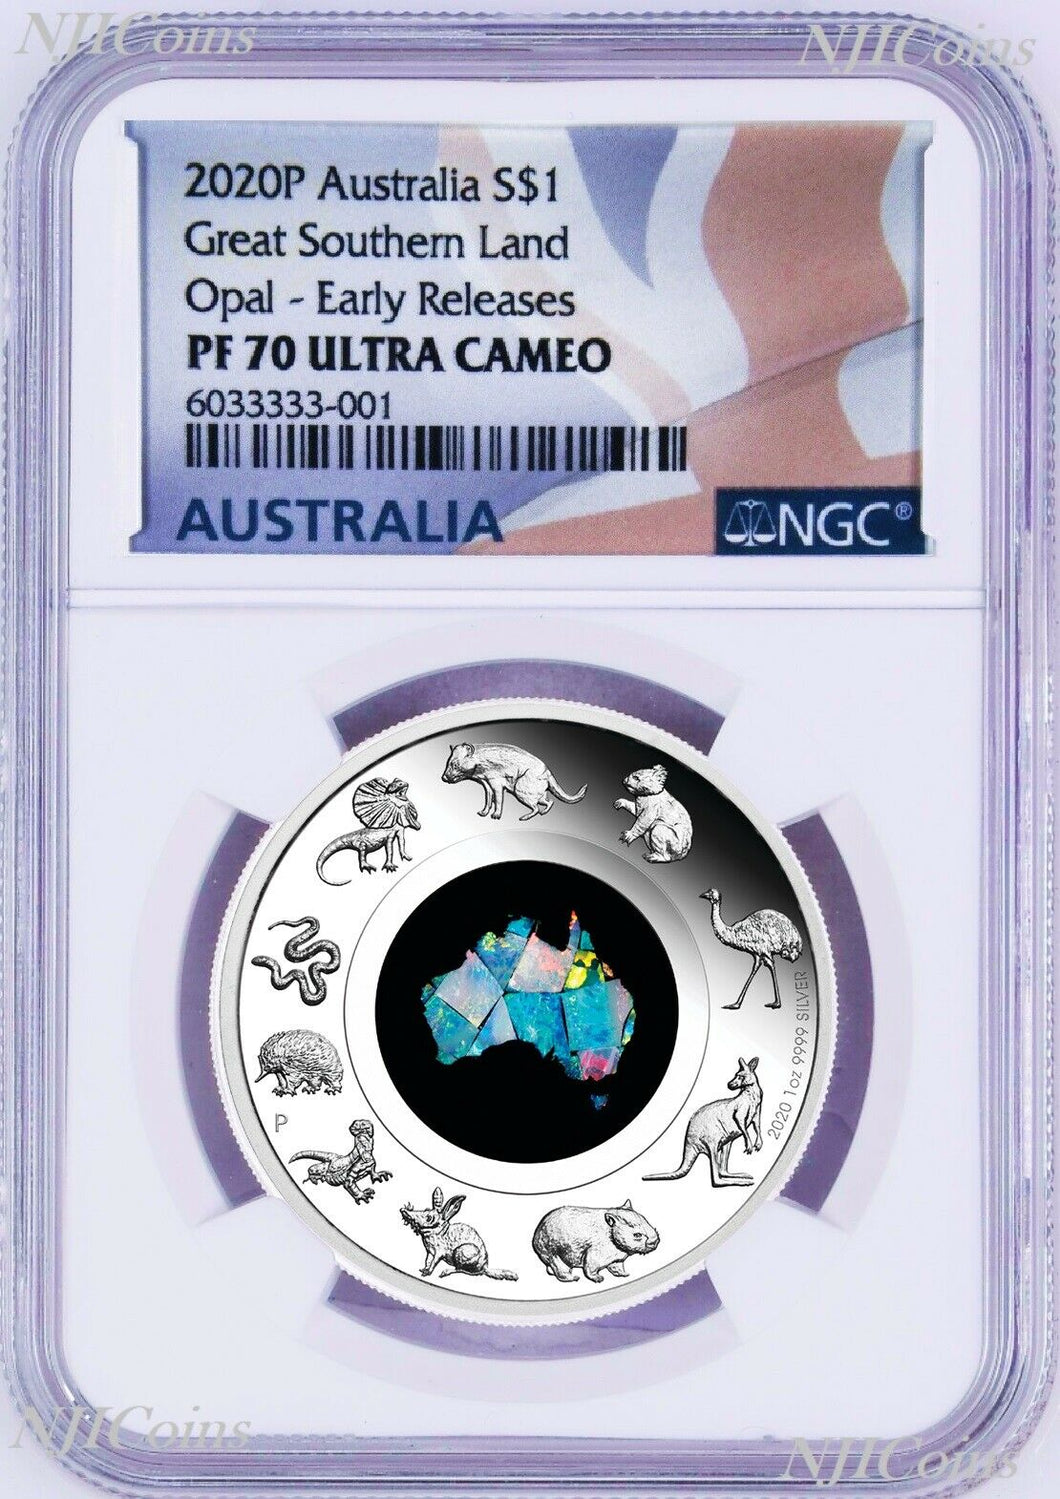 2020 Australia Great Southern Land Opal 1oz Silver Proof Coin NGC PF70 ER HOT